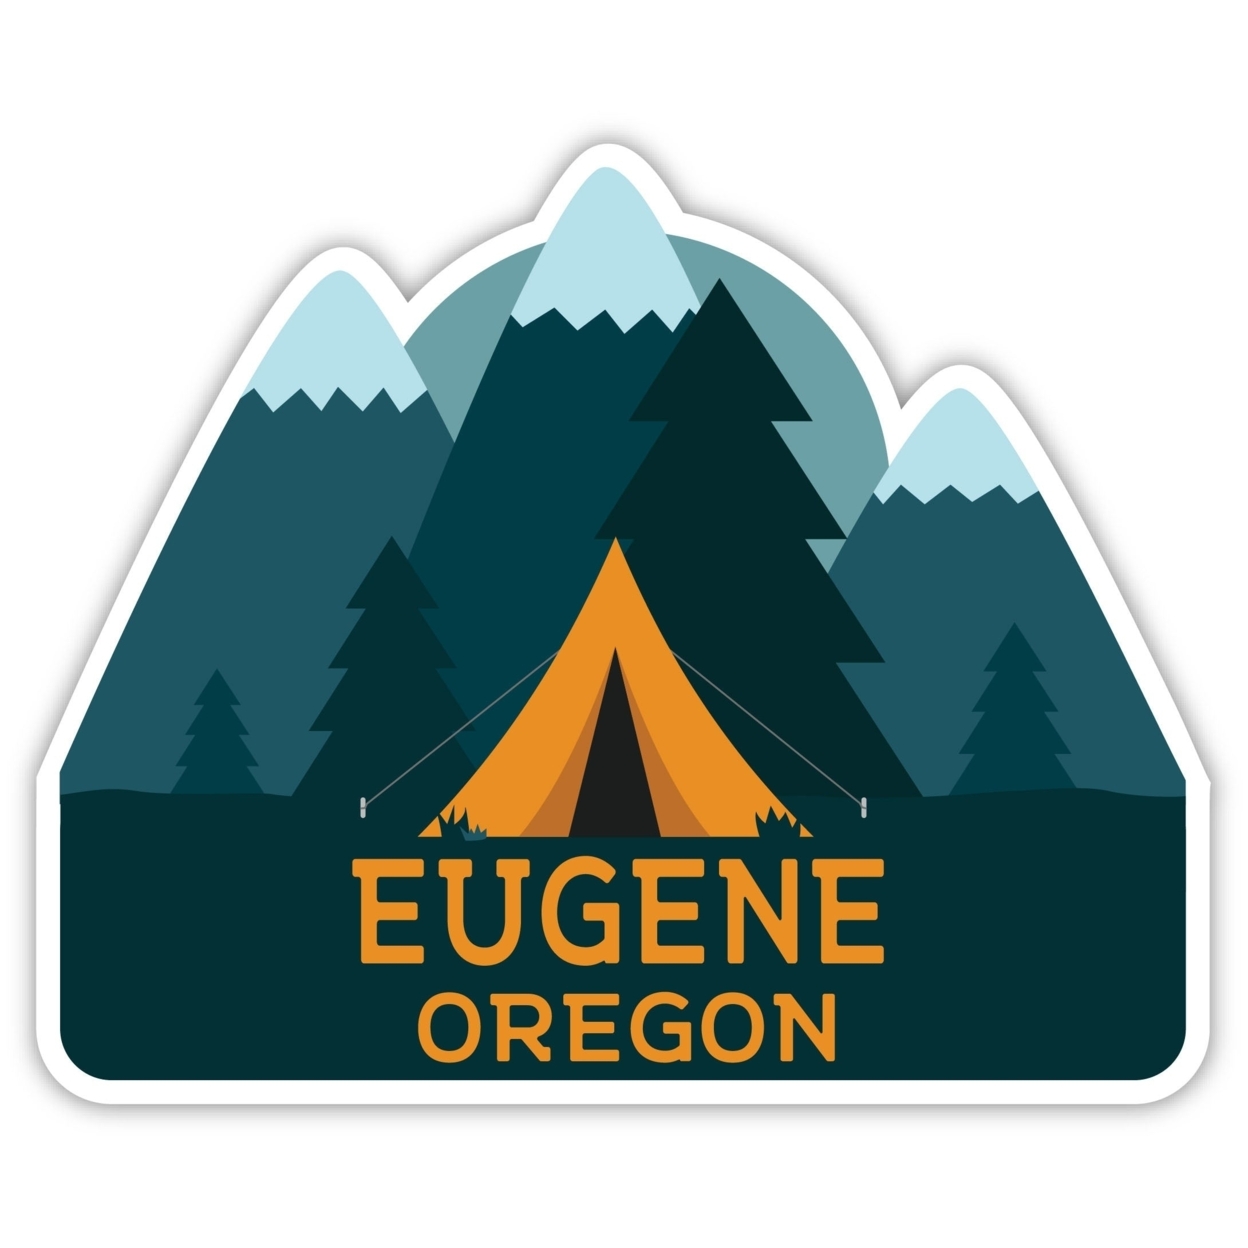 Eugene Oregon Souvenir Decorative Stickers (Choose Theme And Size) - 4-Pack, 10-Inch, Adventures Awaits